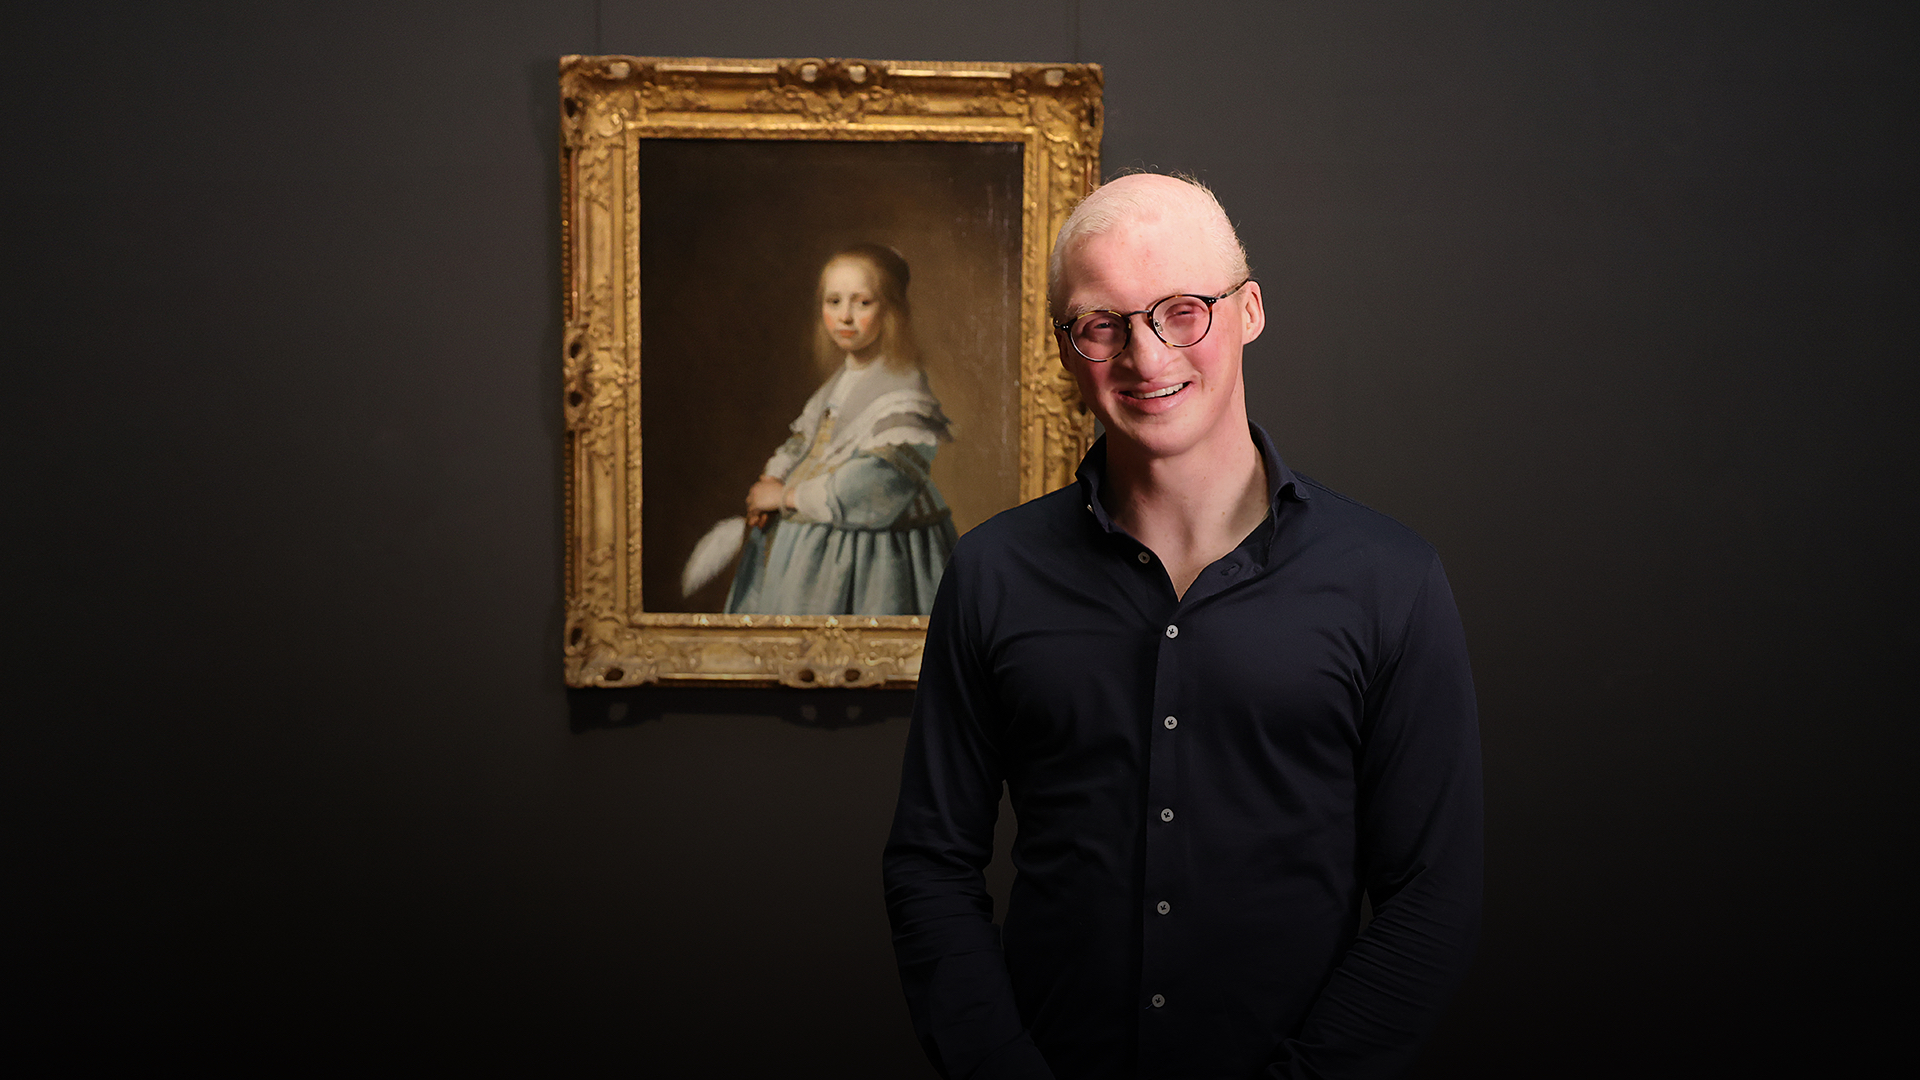 A man with glasses smiling while standing next to a painting of a girl in a blue dress, framed in gold, against a dark background.